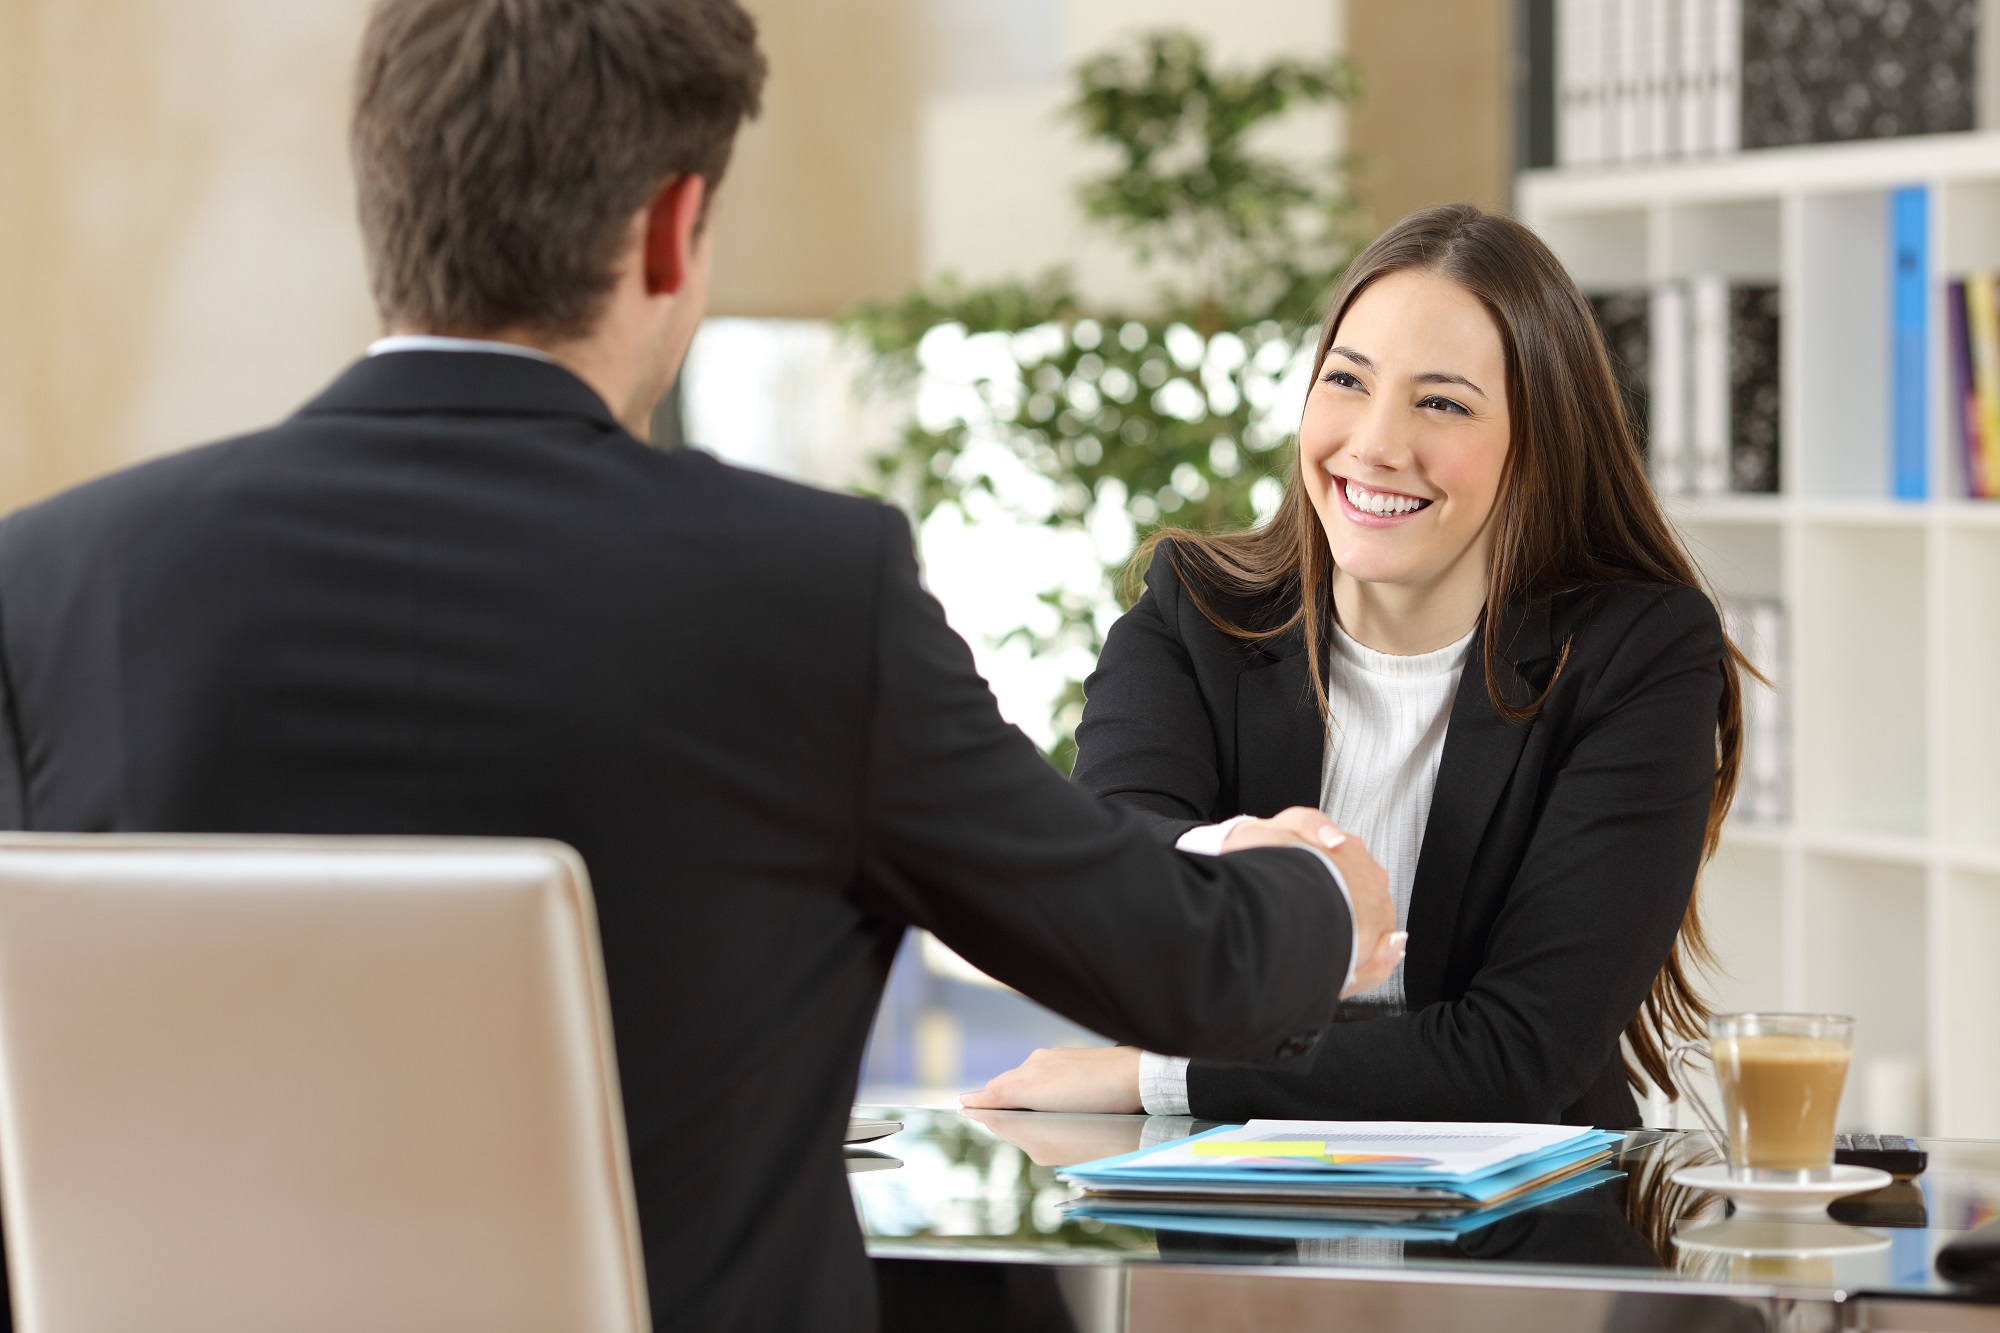 Learn The Most Effective Way To Follow-Up After a Job Interview.